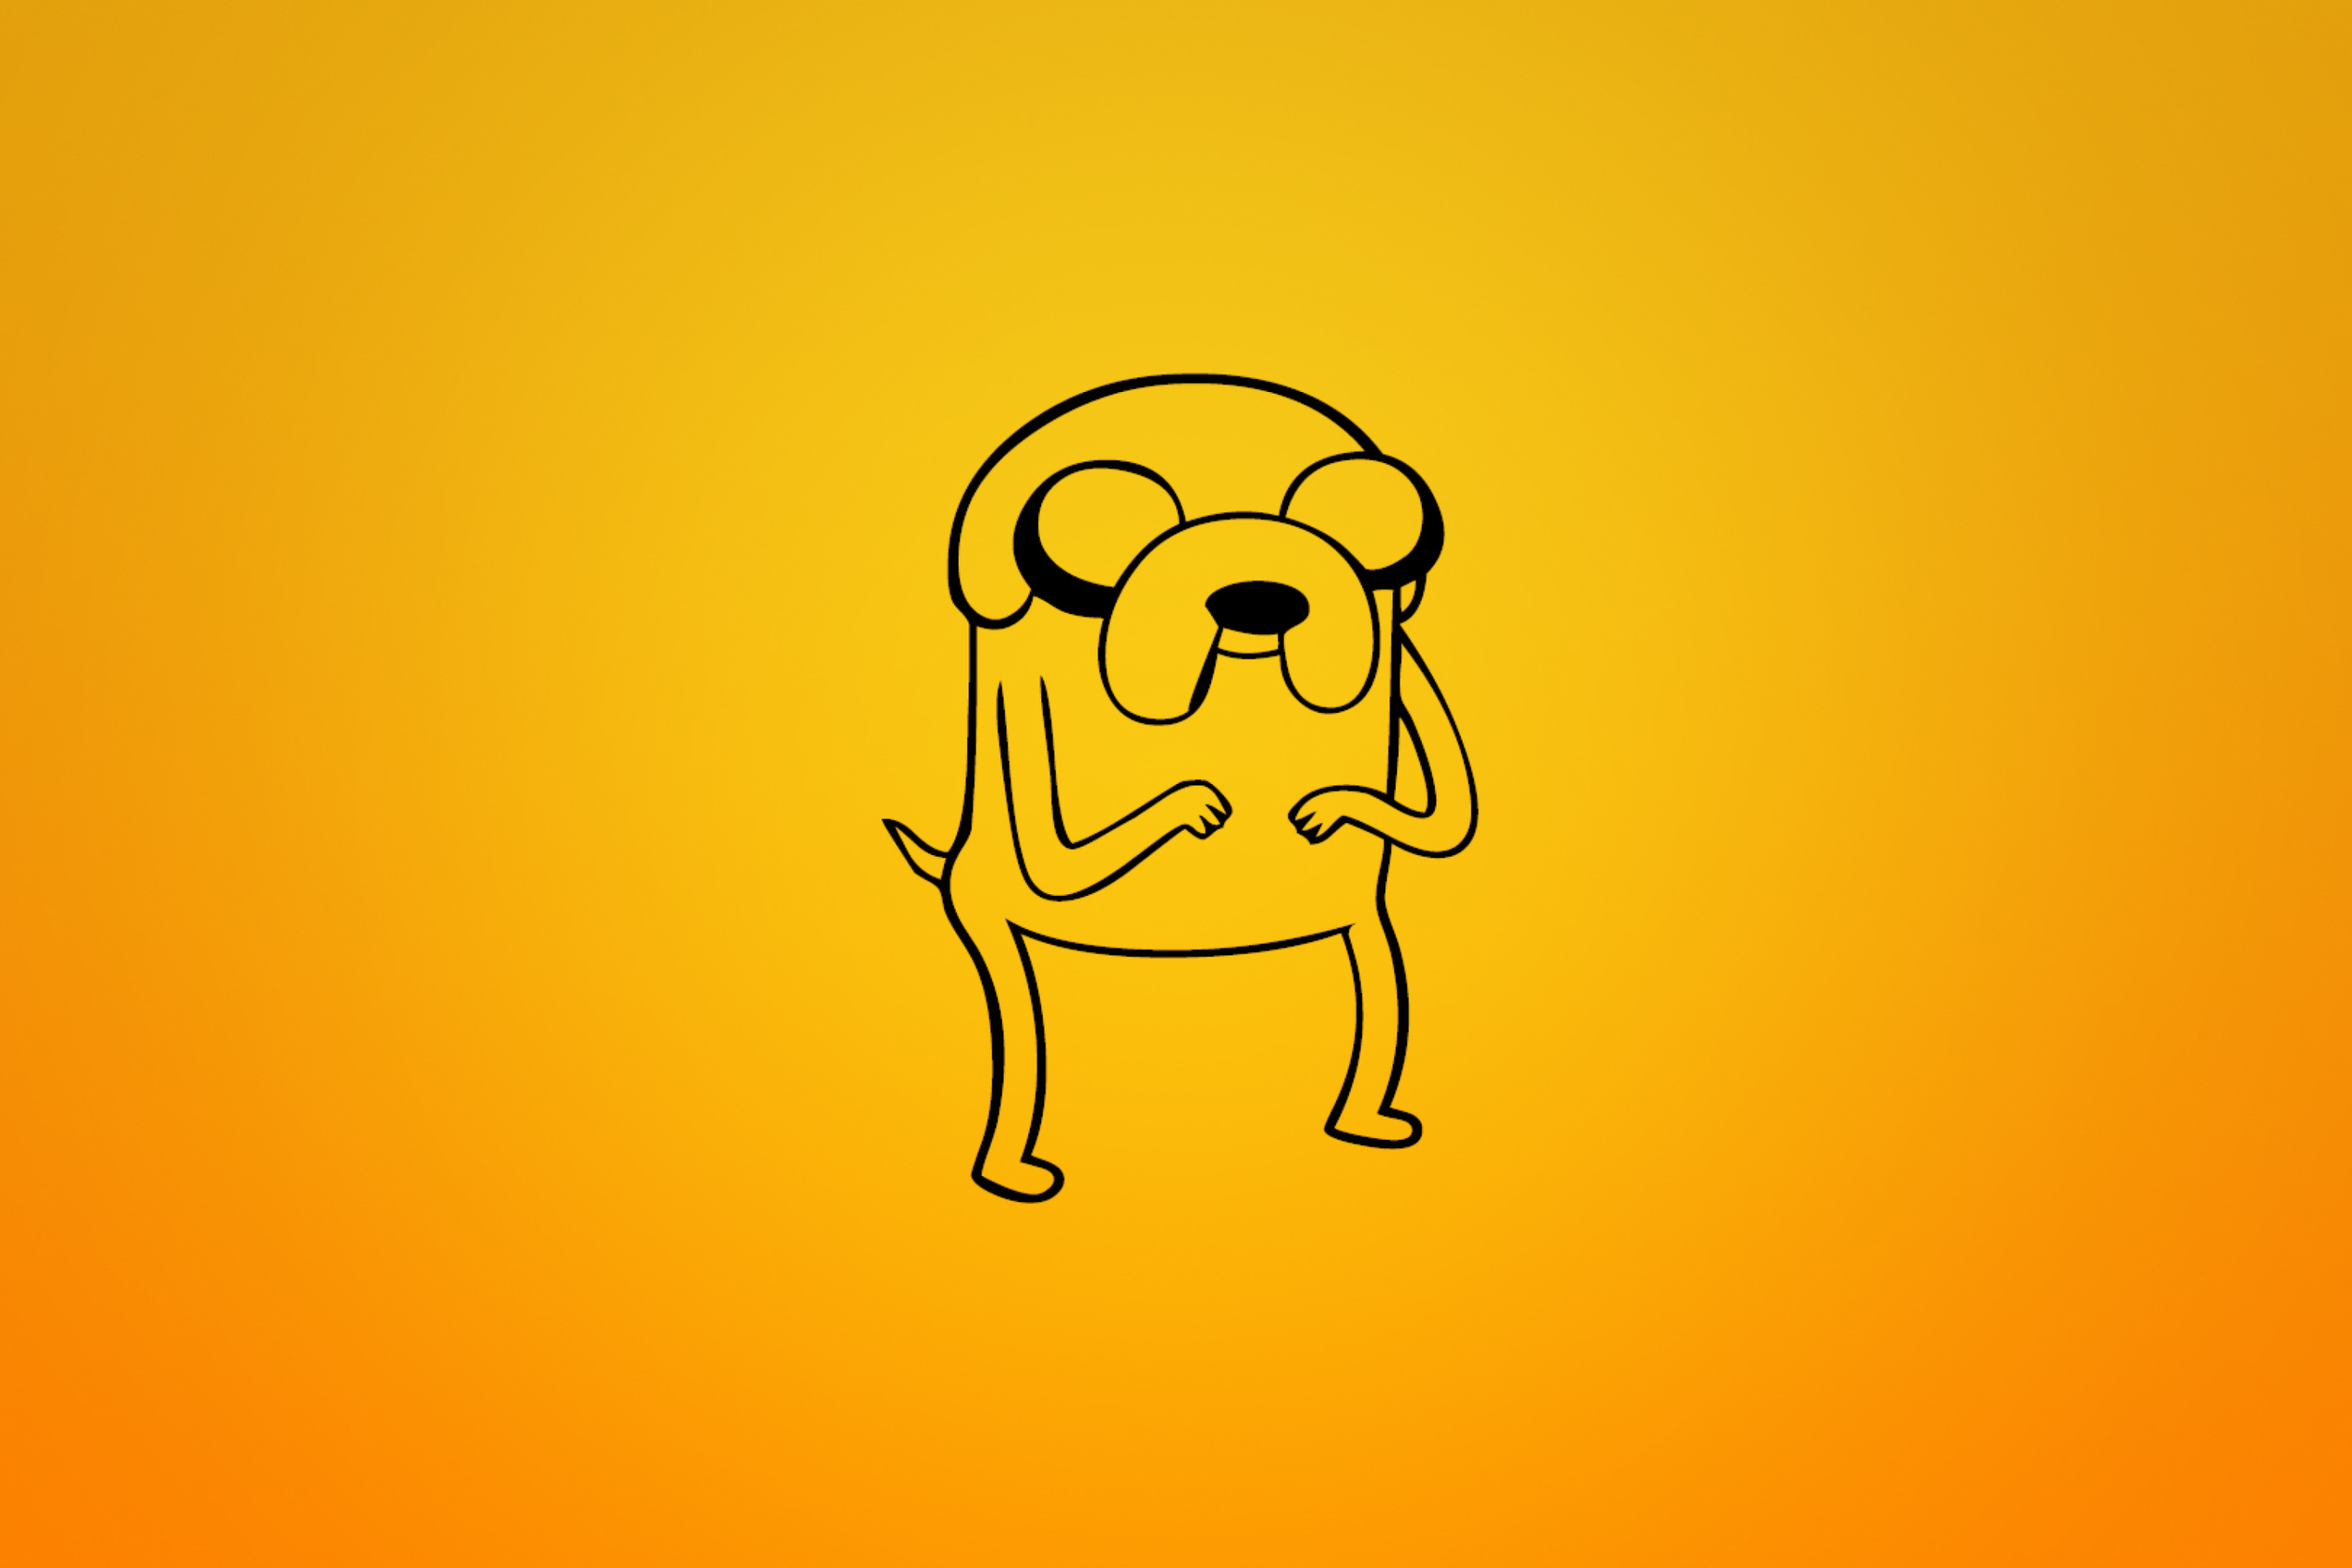 Jake From Adventure Time Illustration wallpaper 2880x1920